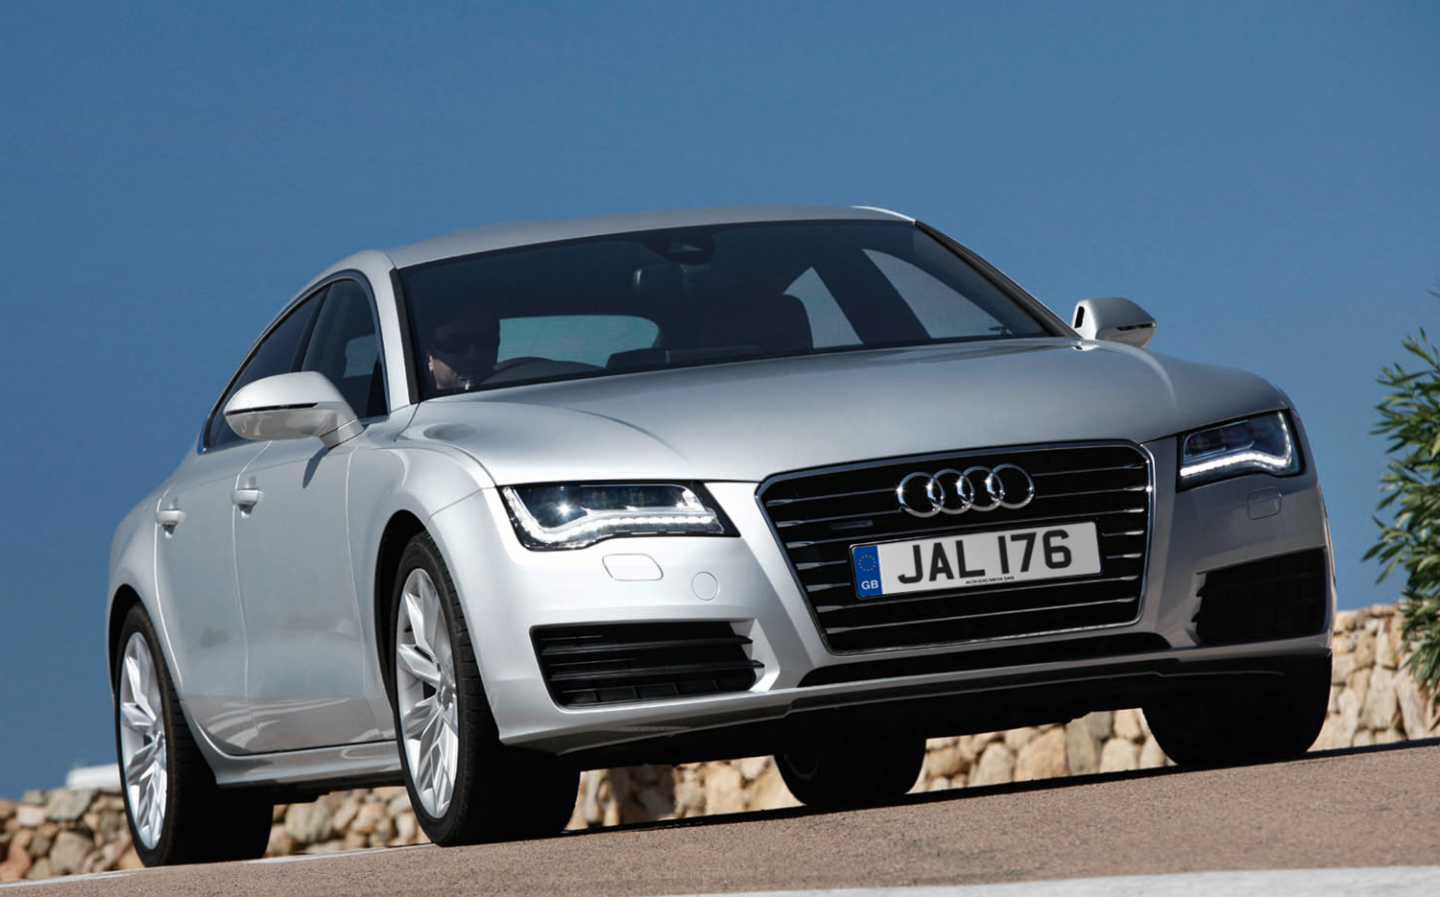 Top five best used executive sports saloons for £20,000